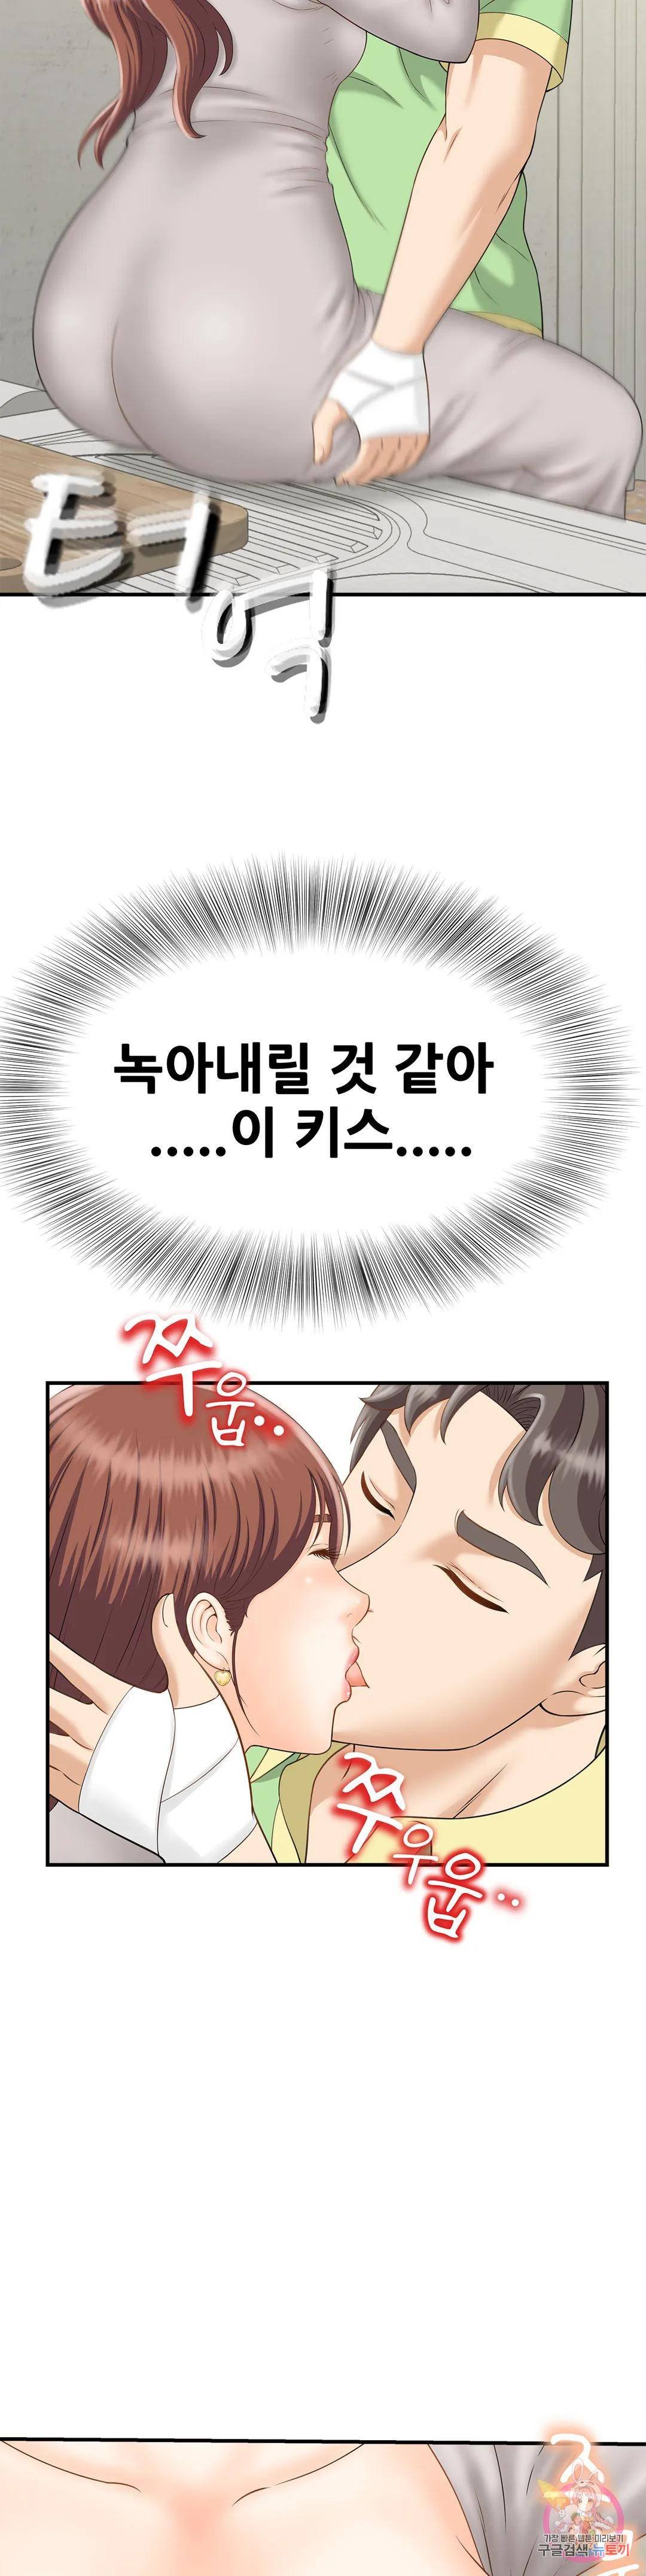 the-hunt-for-married-women-raw-chap-3-28